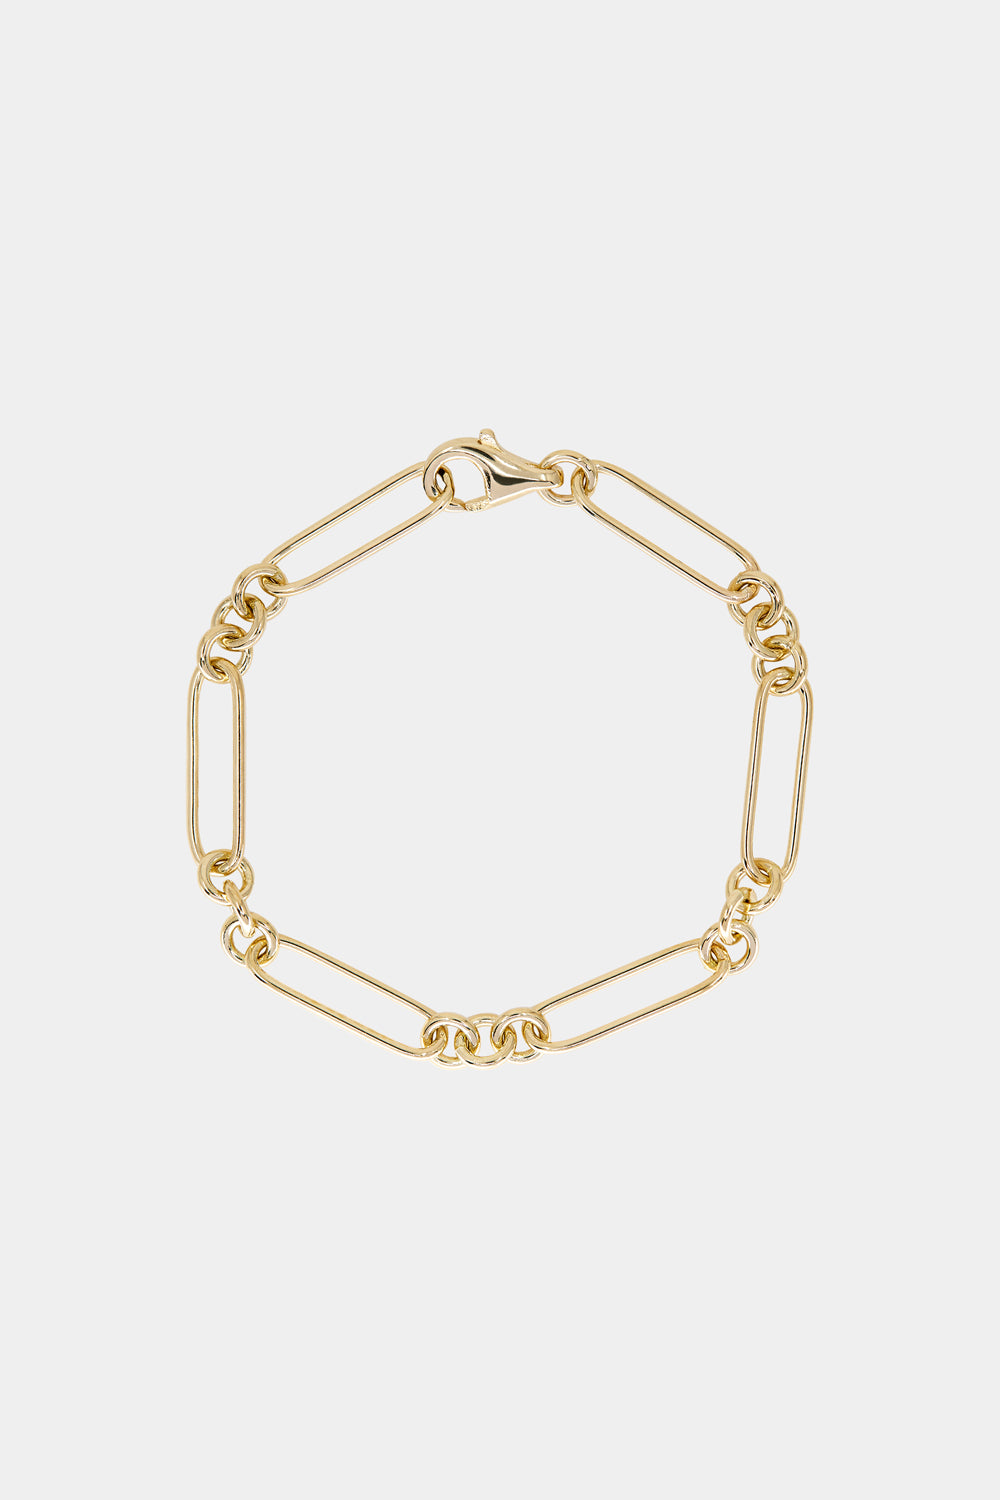 Lennox Bracelet | 9K Yellow or Rose Gold, More Options Available